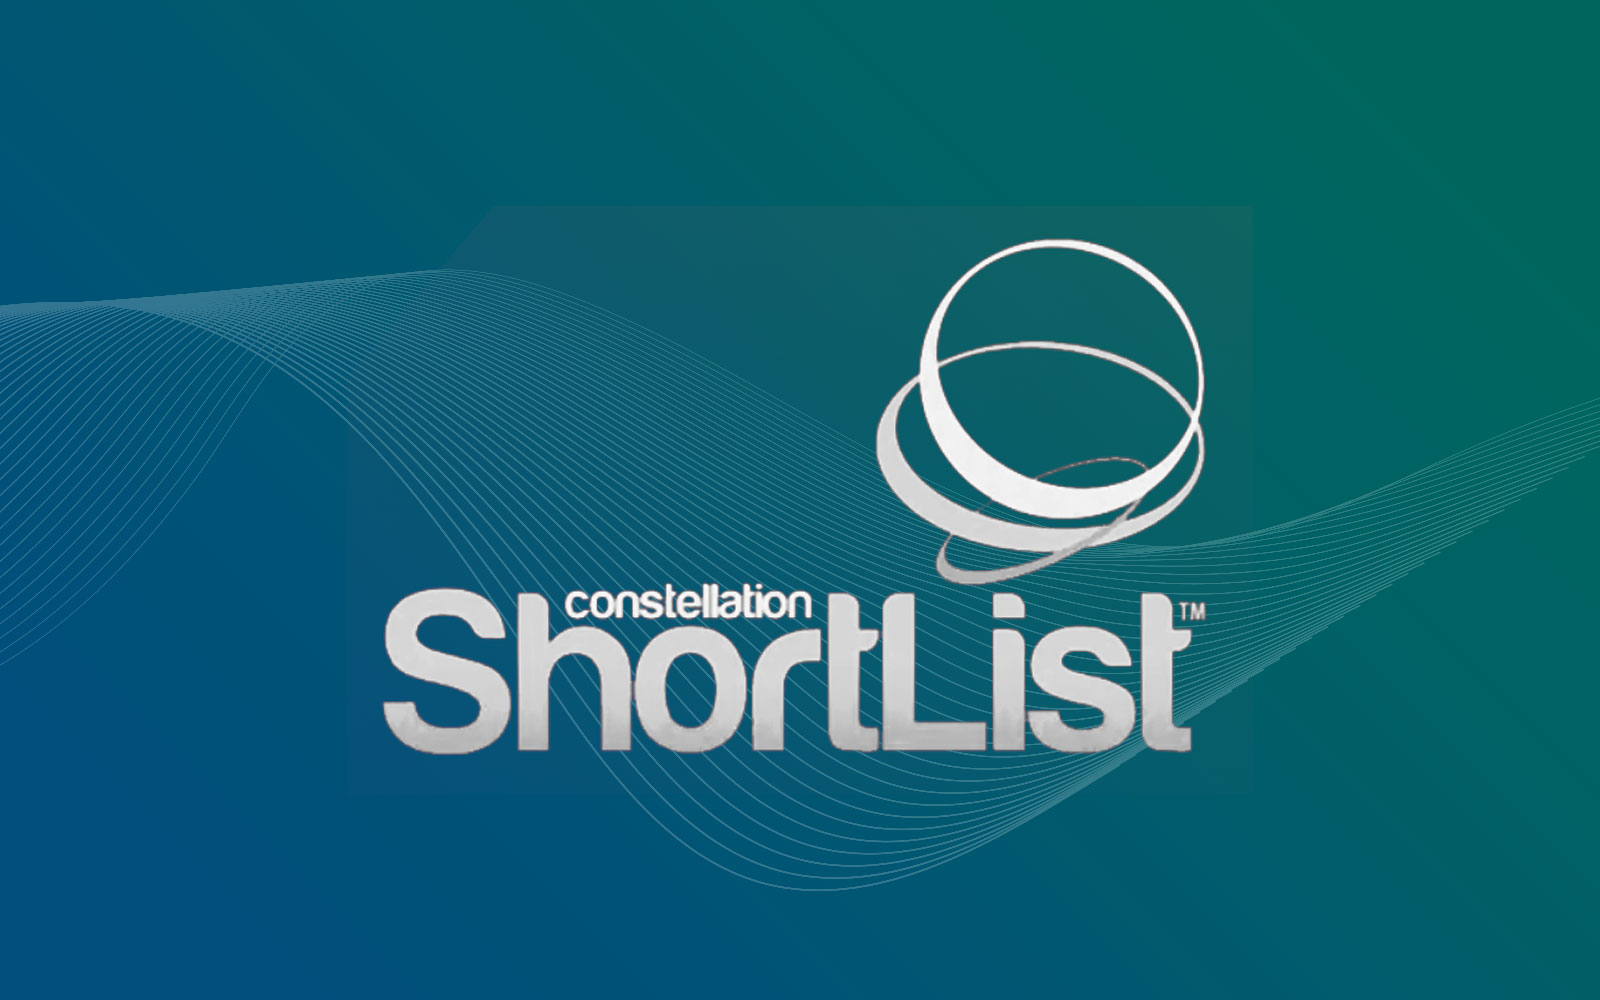 Zilliant Price IQ® Earns a Spot On The Constellation ShortList™ for Top 10 Price Optimization Solutions